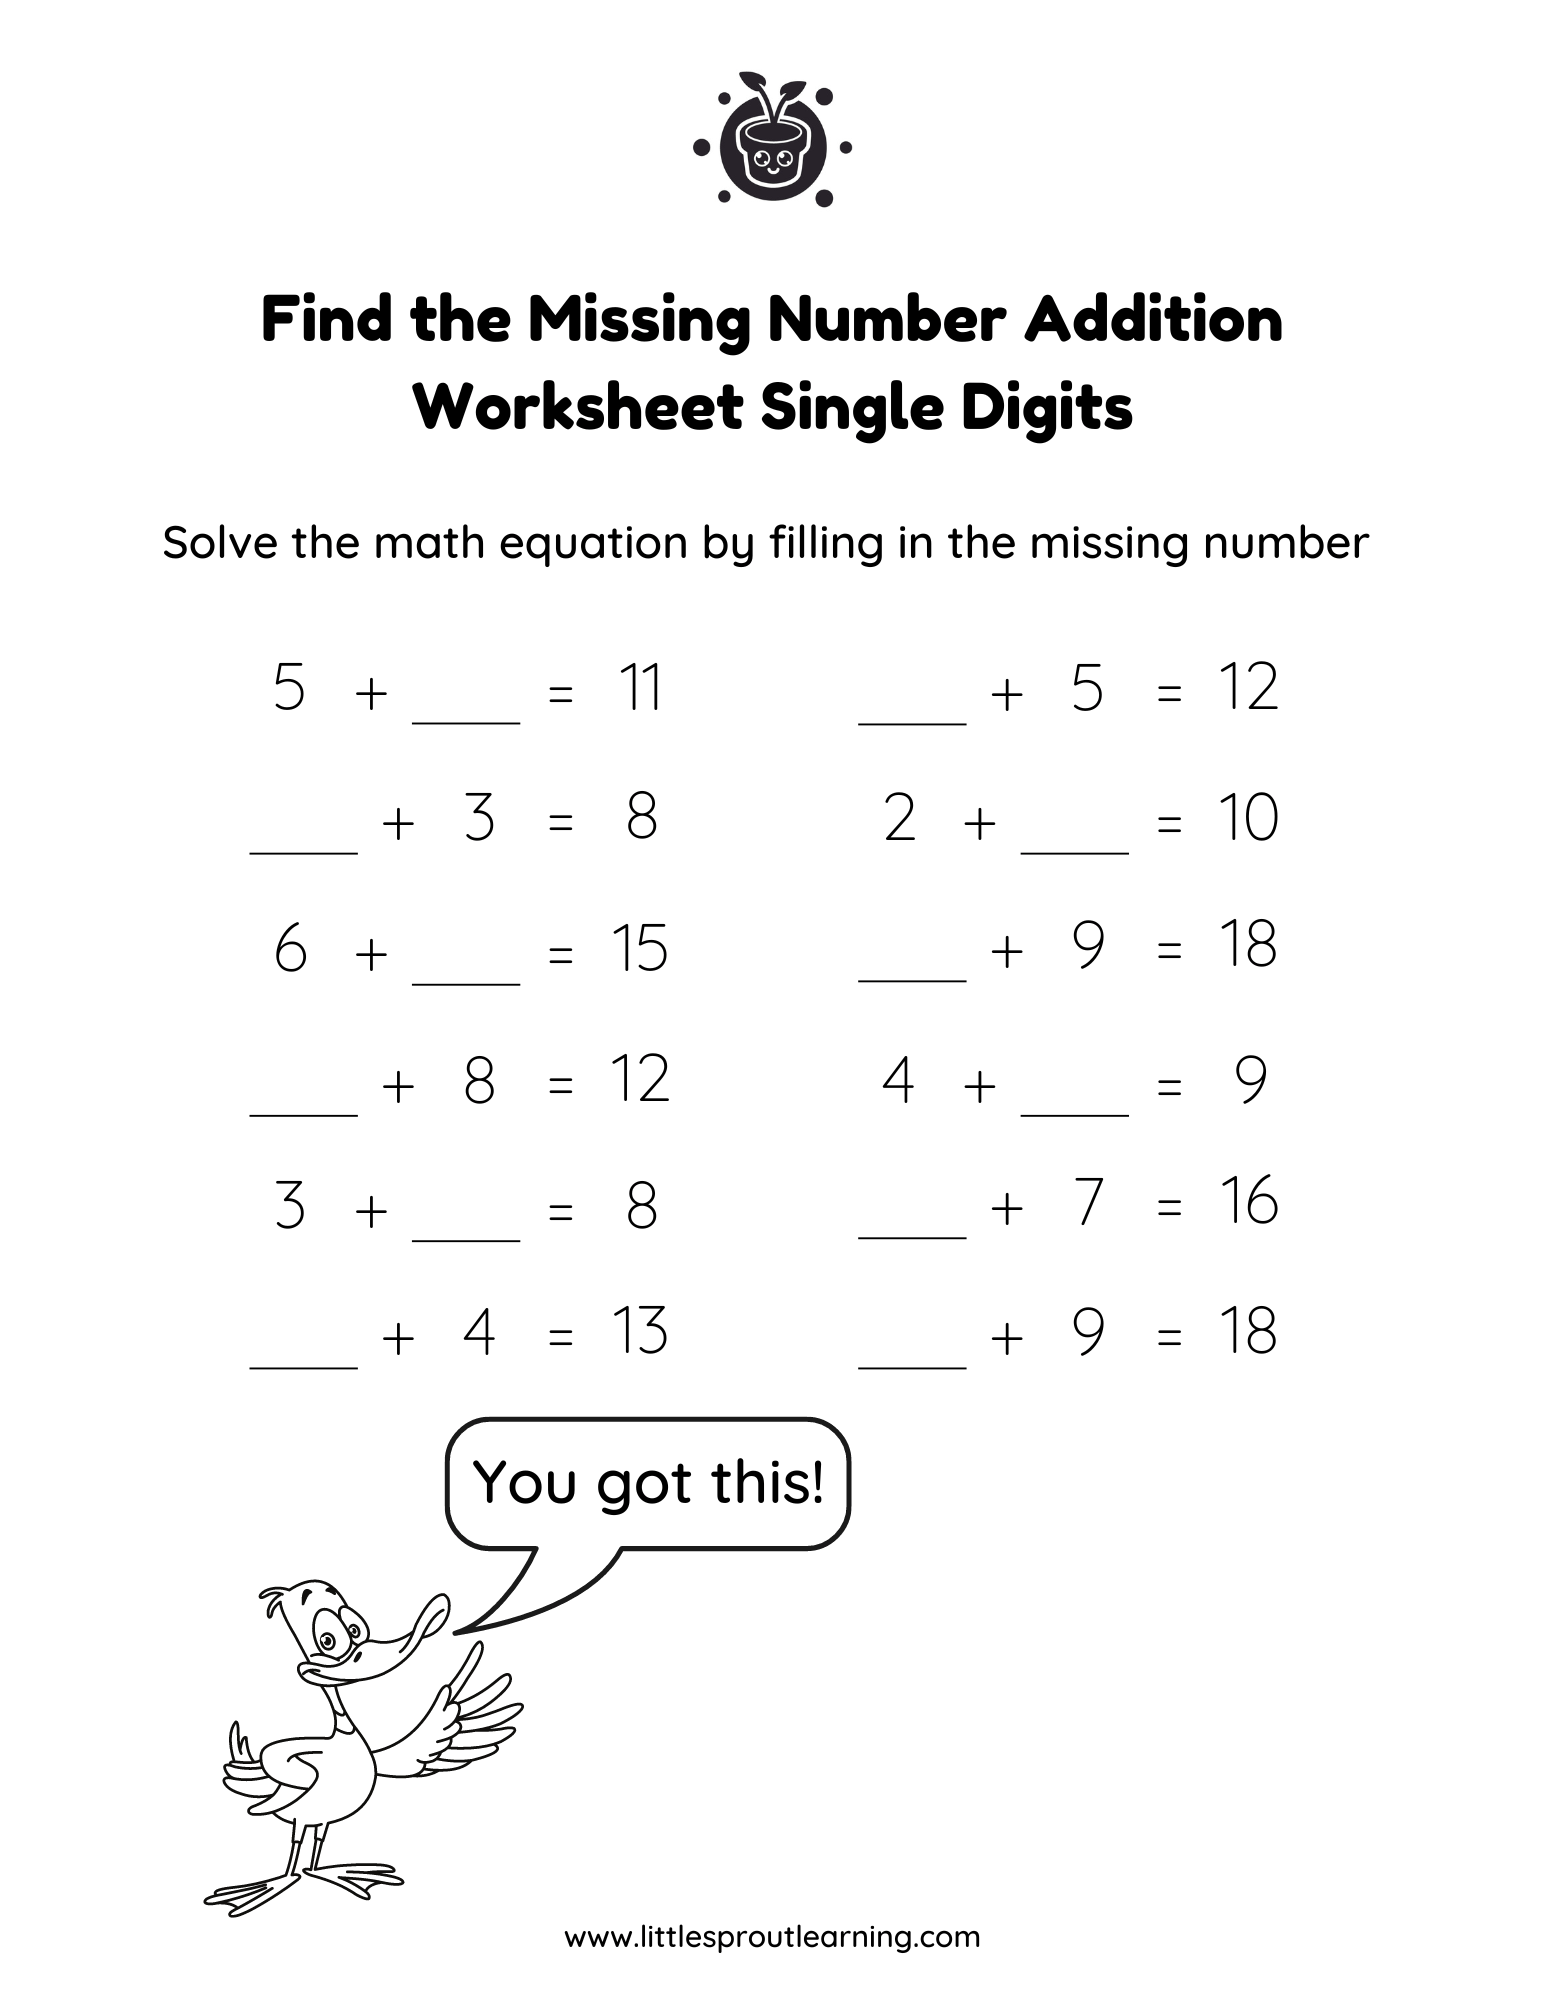 Find the Missing Number Addition Worksheet Grade 2 Single Digits Feature